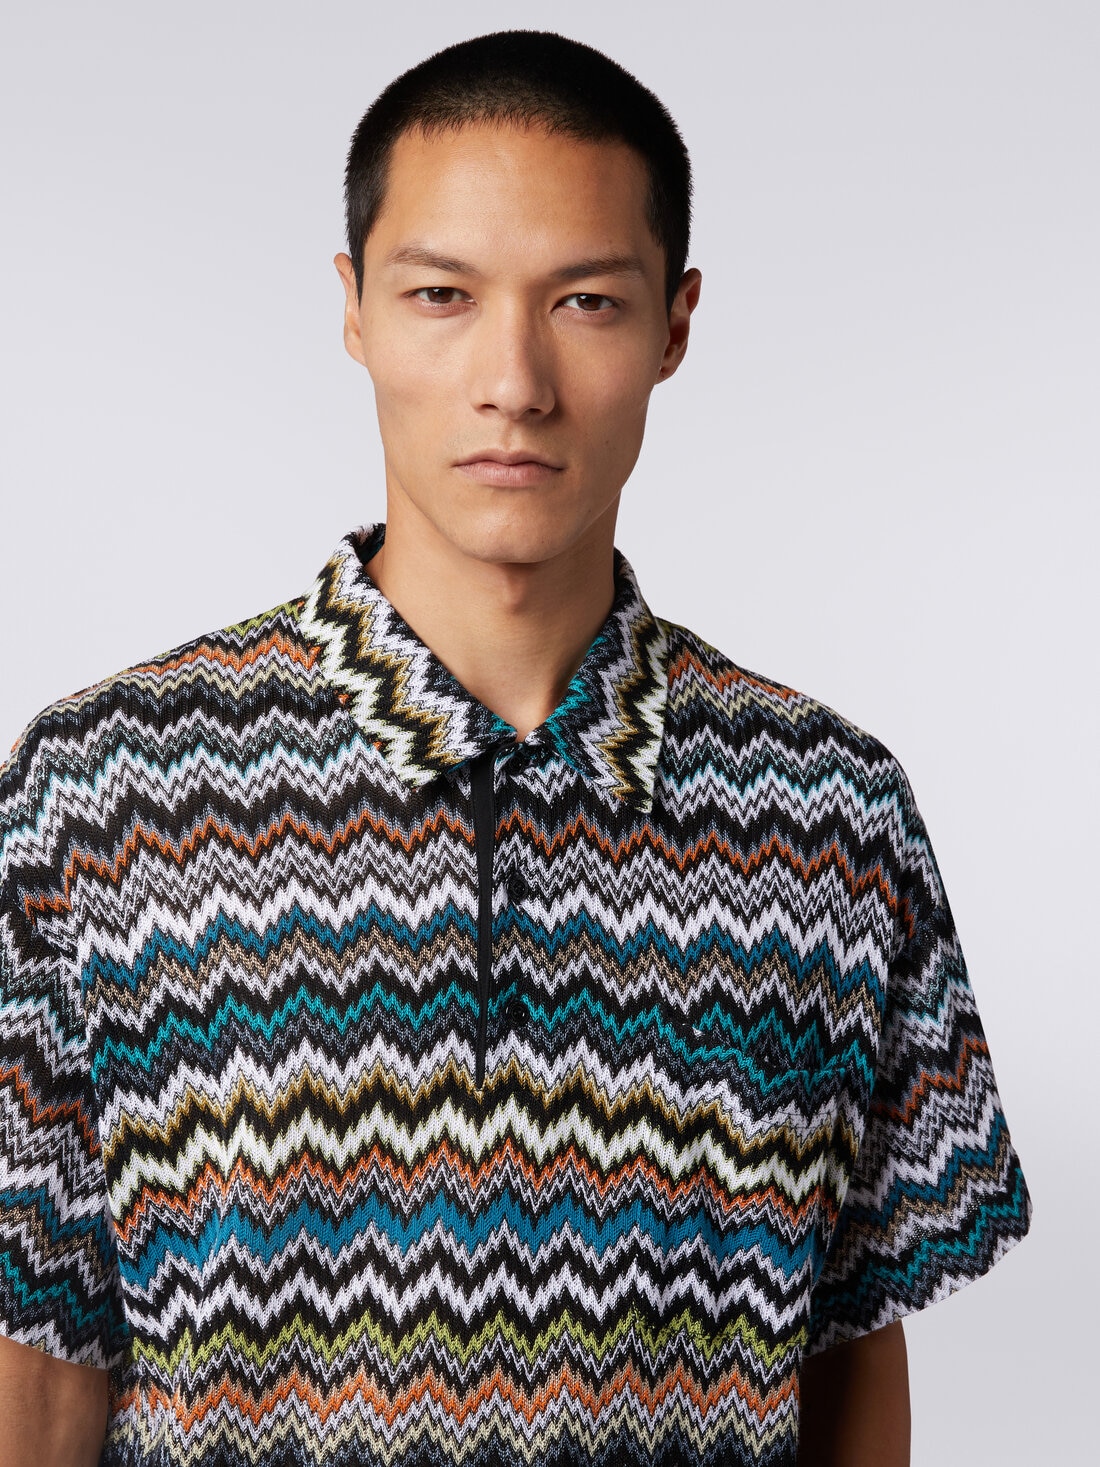 Polo shirt in zigzag cotton and viscose knit, Multicoloured  - TS24S201BR00UUSM9AX - 4